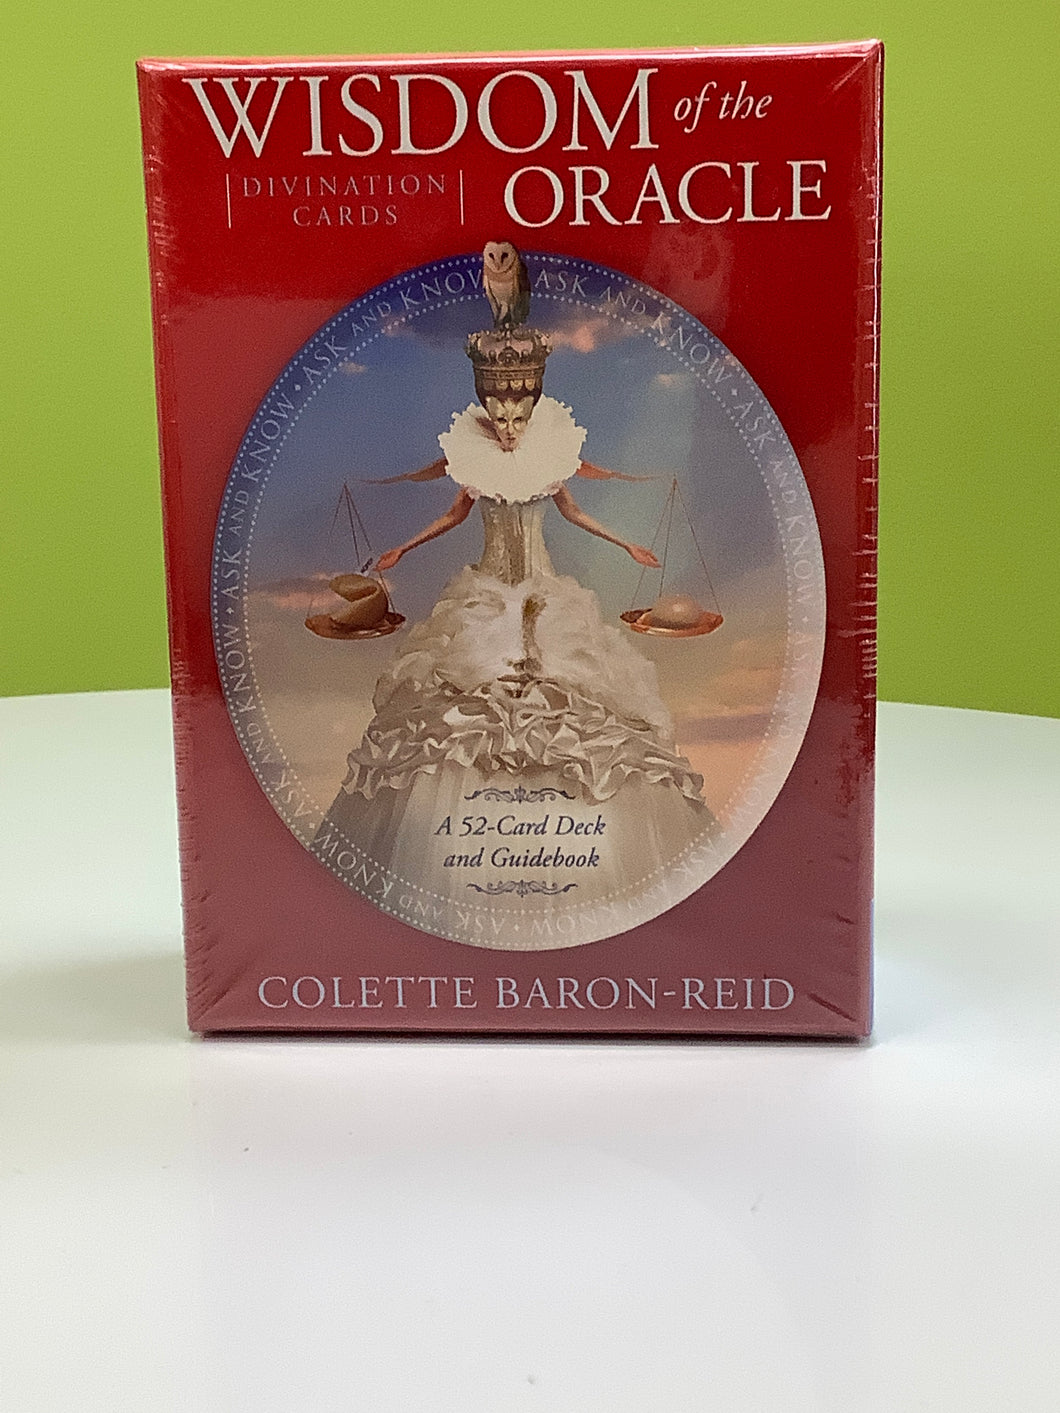 Wisdom of the Oracle Divination Card Deck and Guidebook